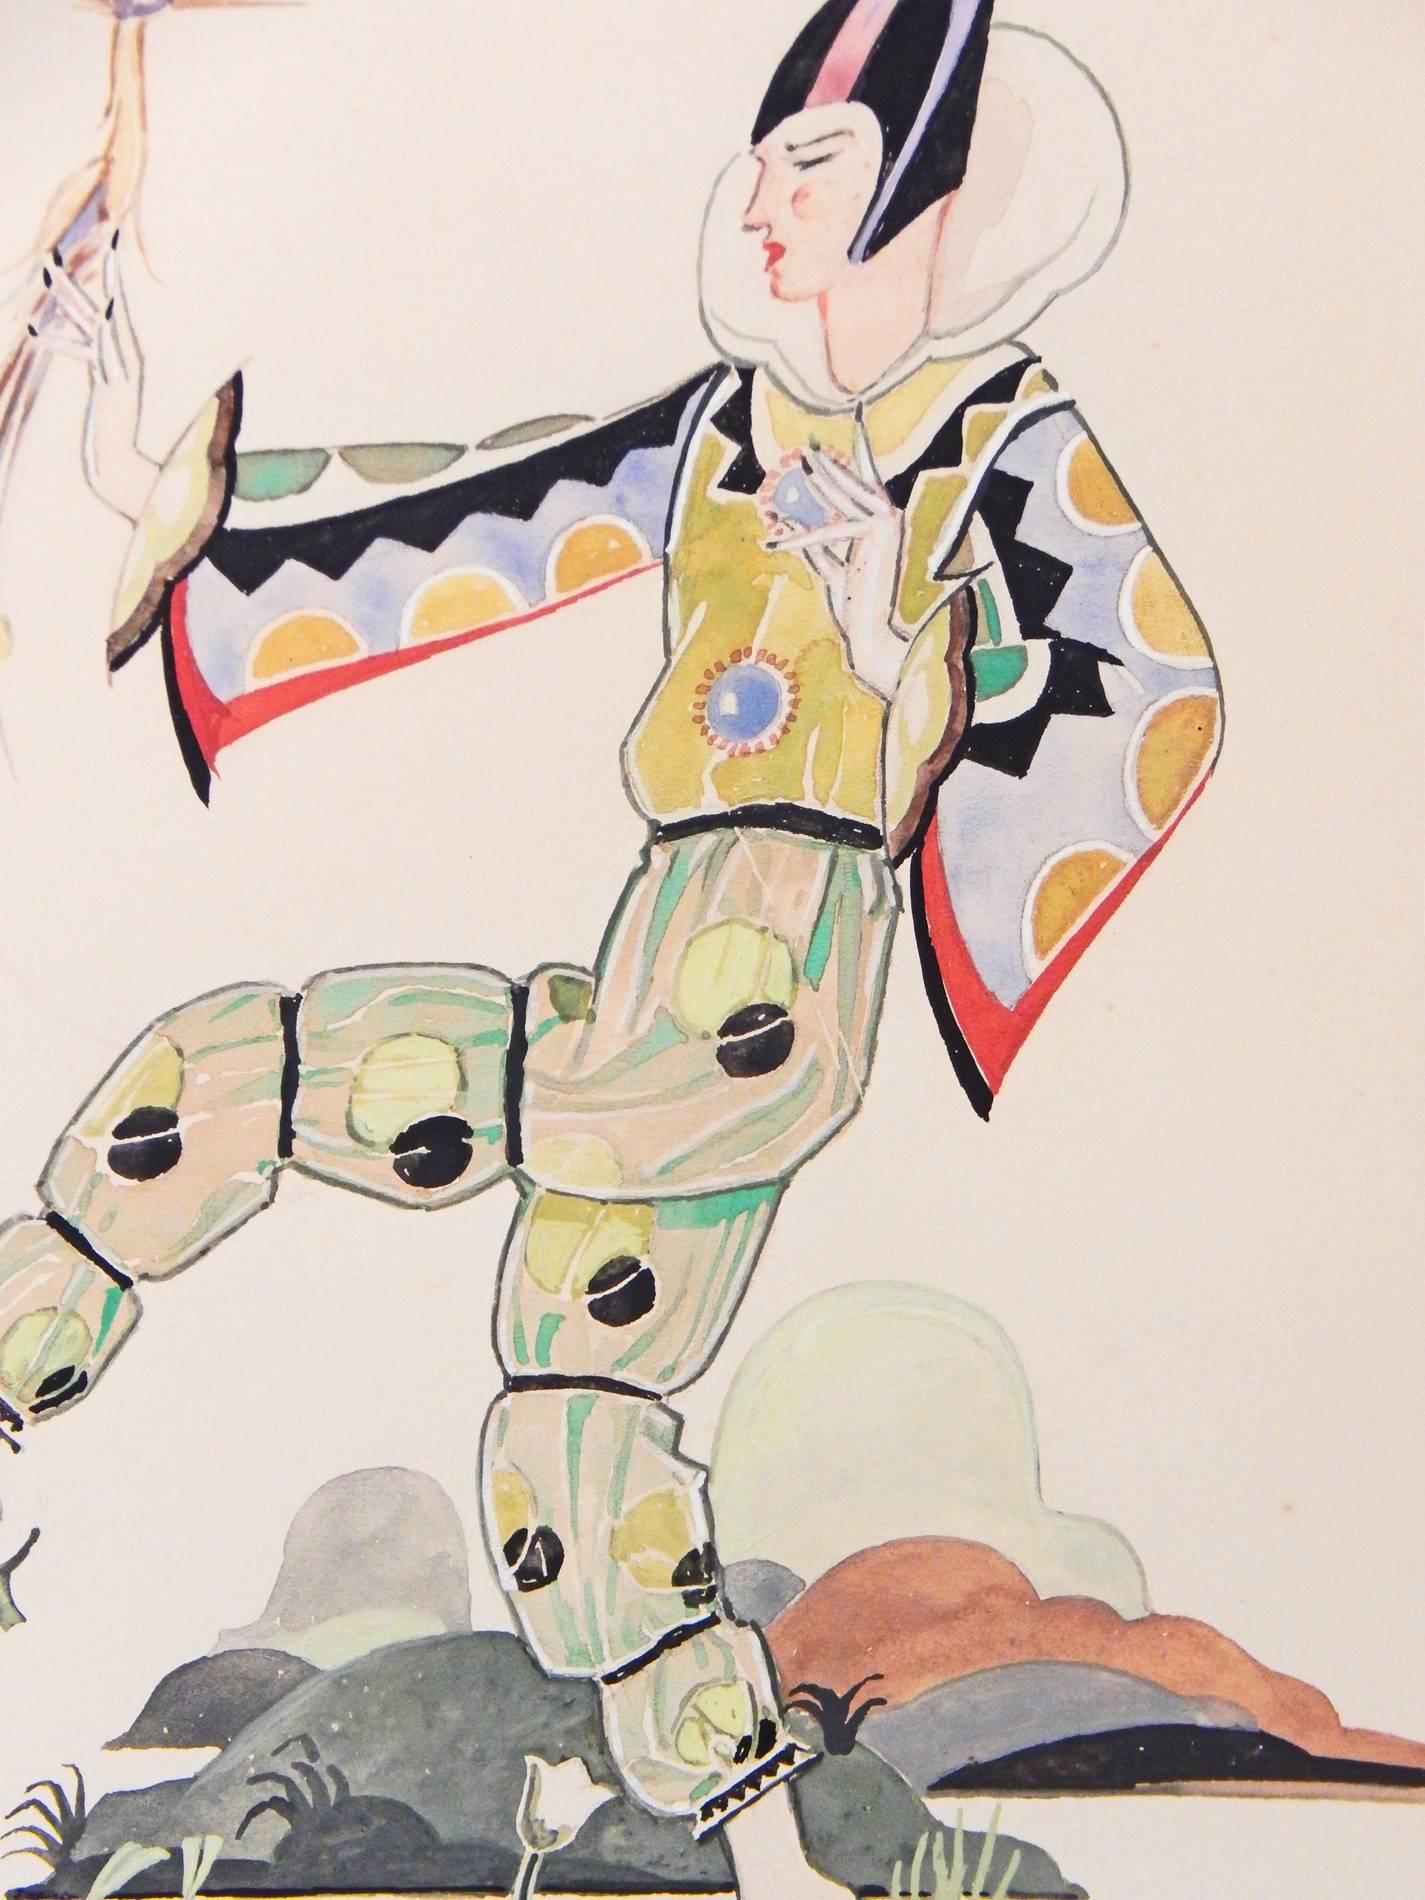 Vivid and striking, this Classic Art Deco watercolor of an exotic female figure in harem pants and geometric-patterned blouse, balancing a bird of paradise on one hand was painted by P. Forbes, perhaps as a costume design for a ballet or opera